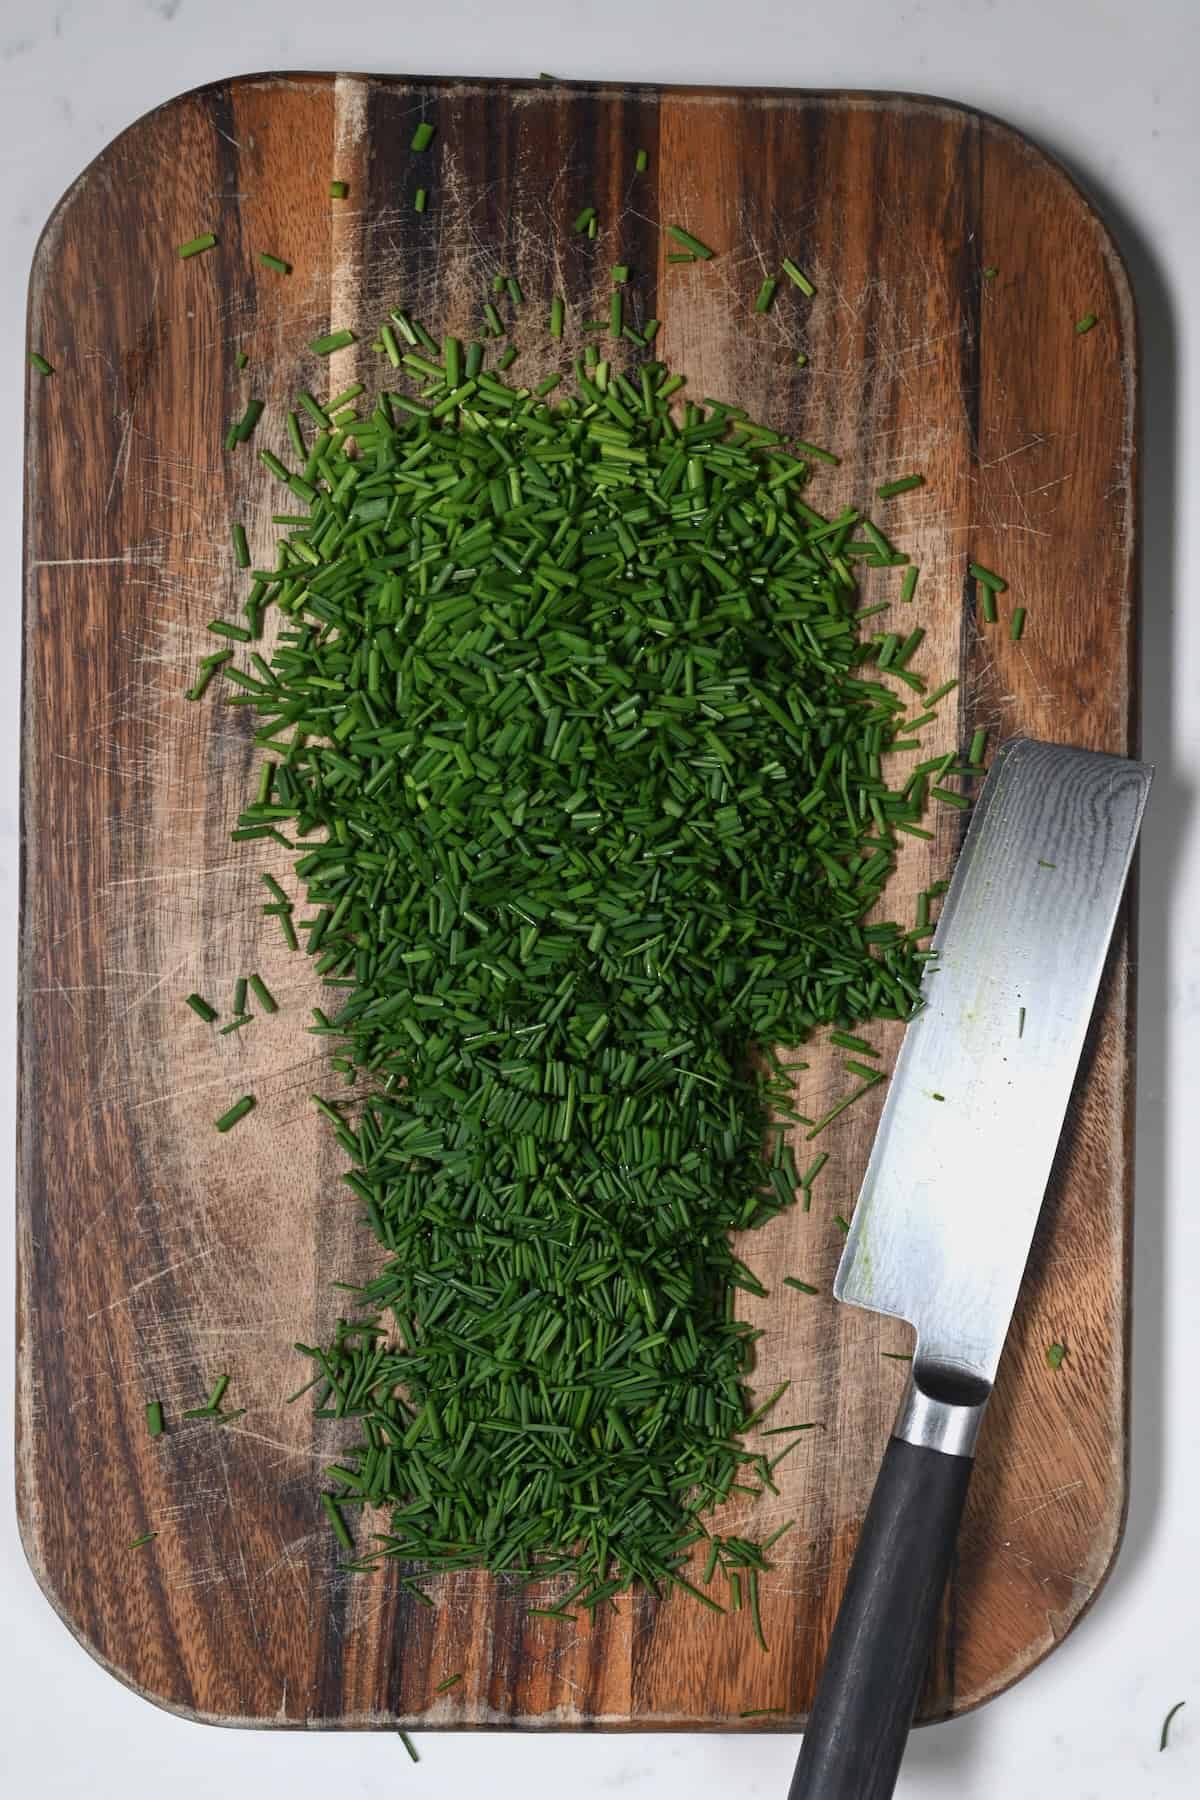 Chopped chives on a cutting board